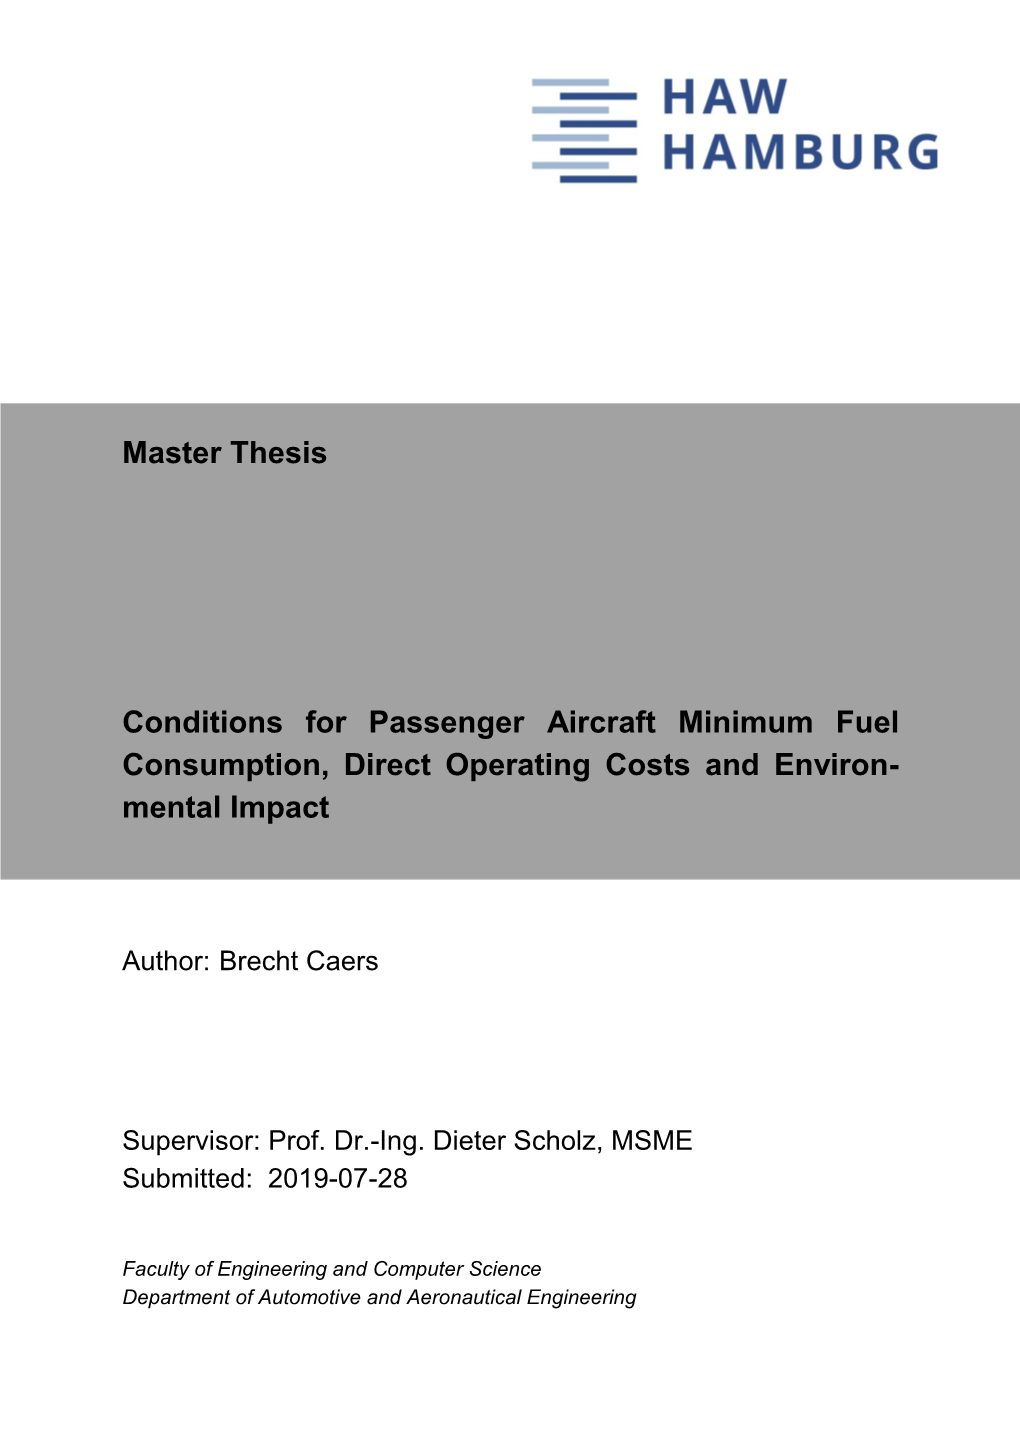 Conditions for Passenger Aircraft Minimum Fuel Consumption, Direct Operating Costs and Environmental Impact”